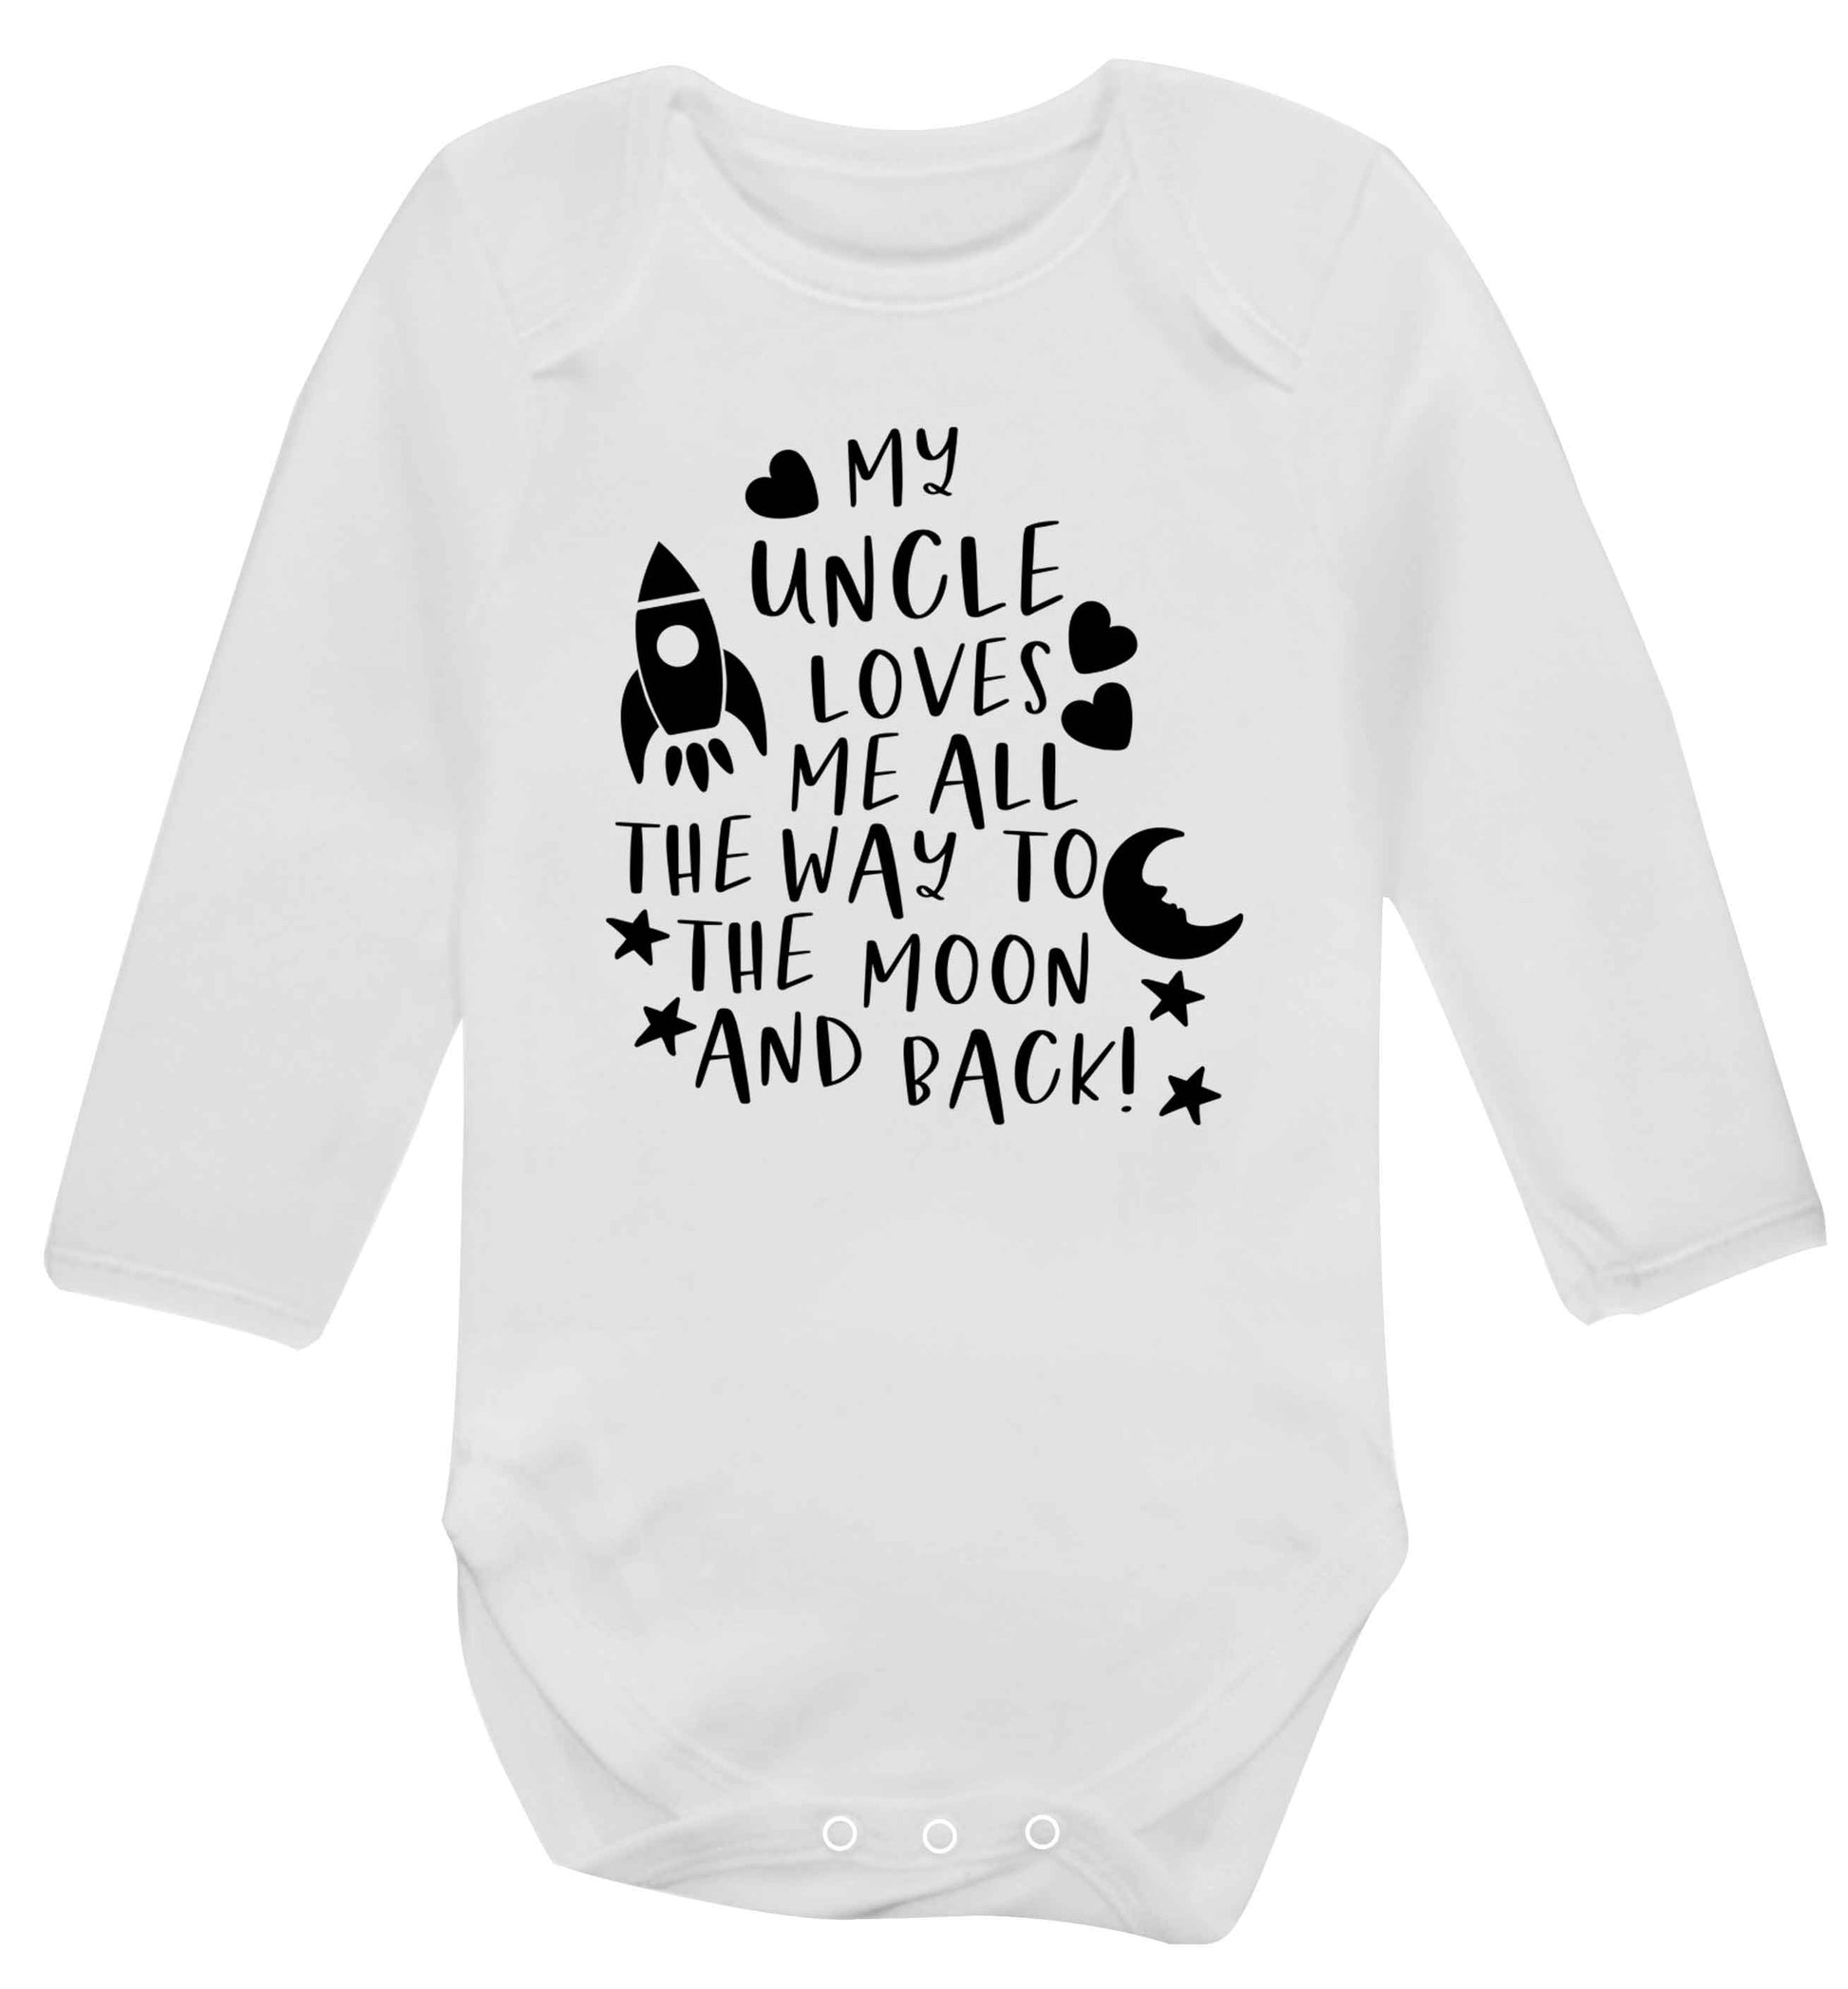 My uncle loves me all the way to the moon and back Baby Vest long sleeved white 6-12 months